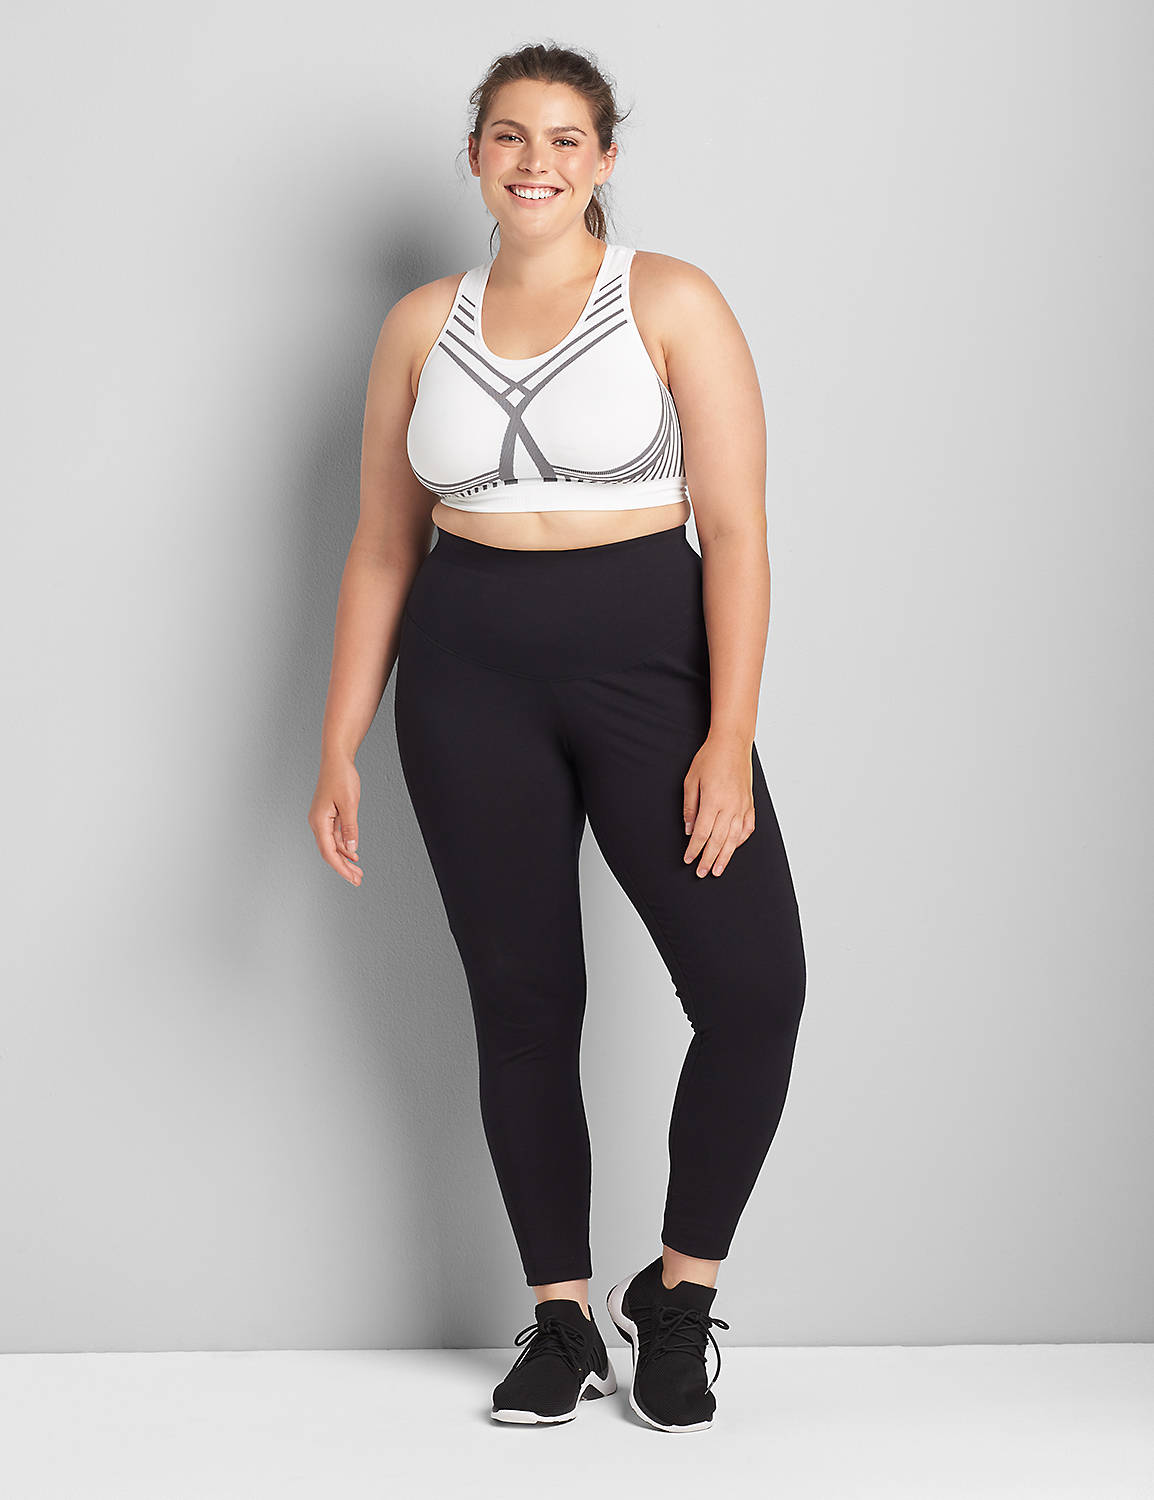 Zoned Seamless Contrast Sport Bra 1 Product Image 3